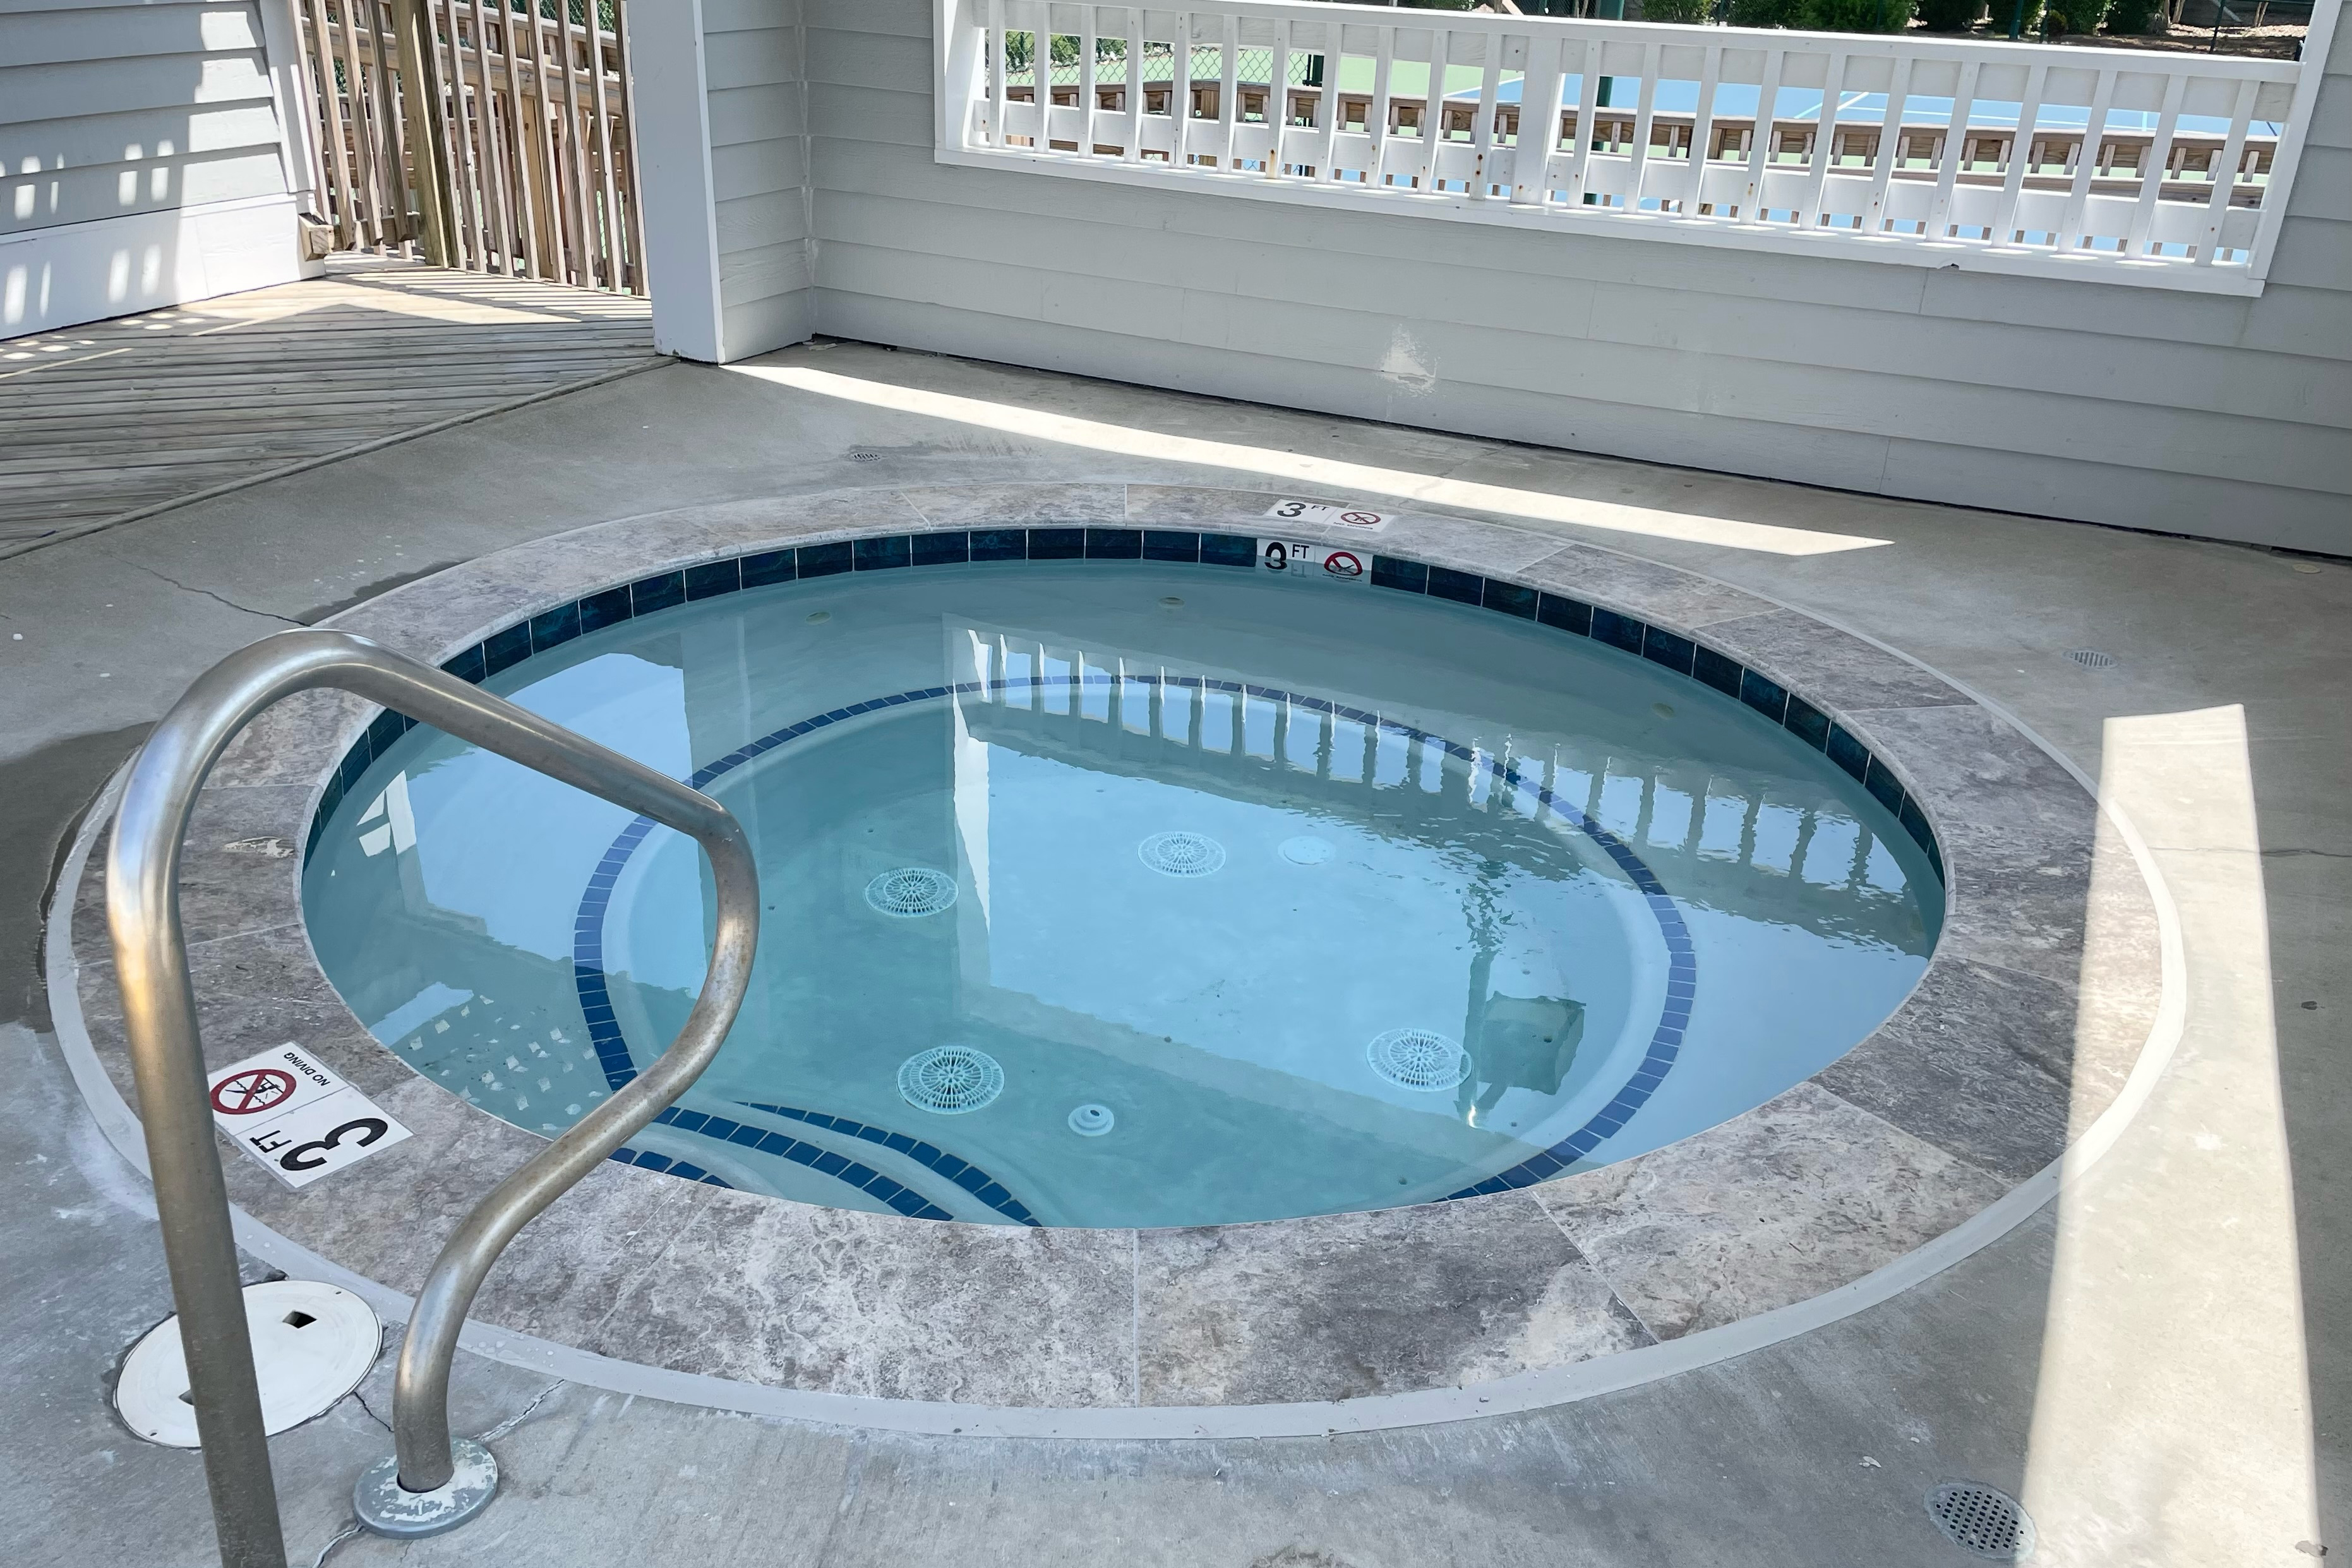 PC913: Captain's Quarters | Community Pool w/ In-Ground Spa